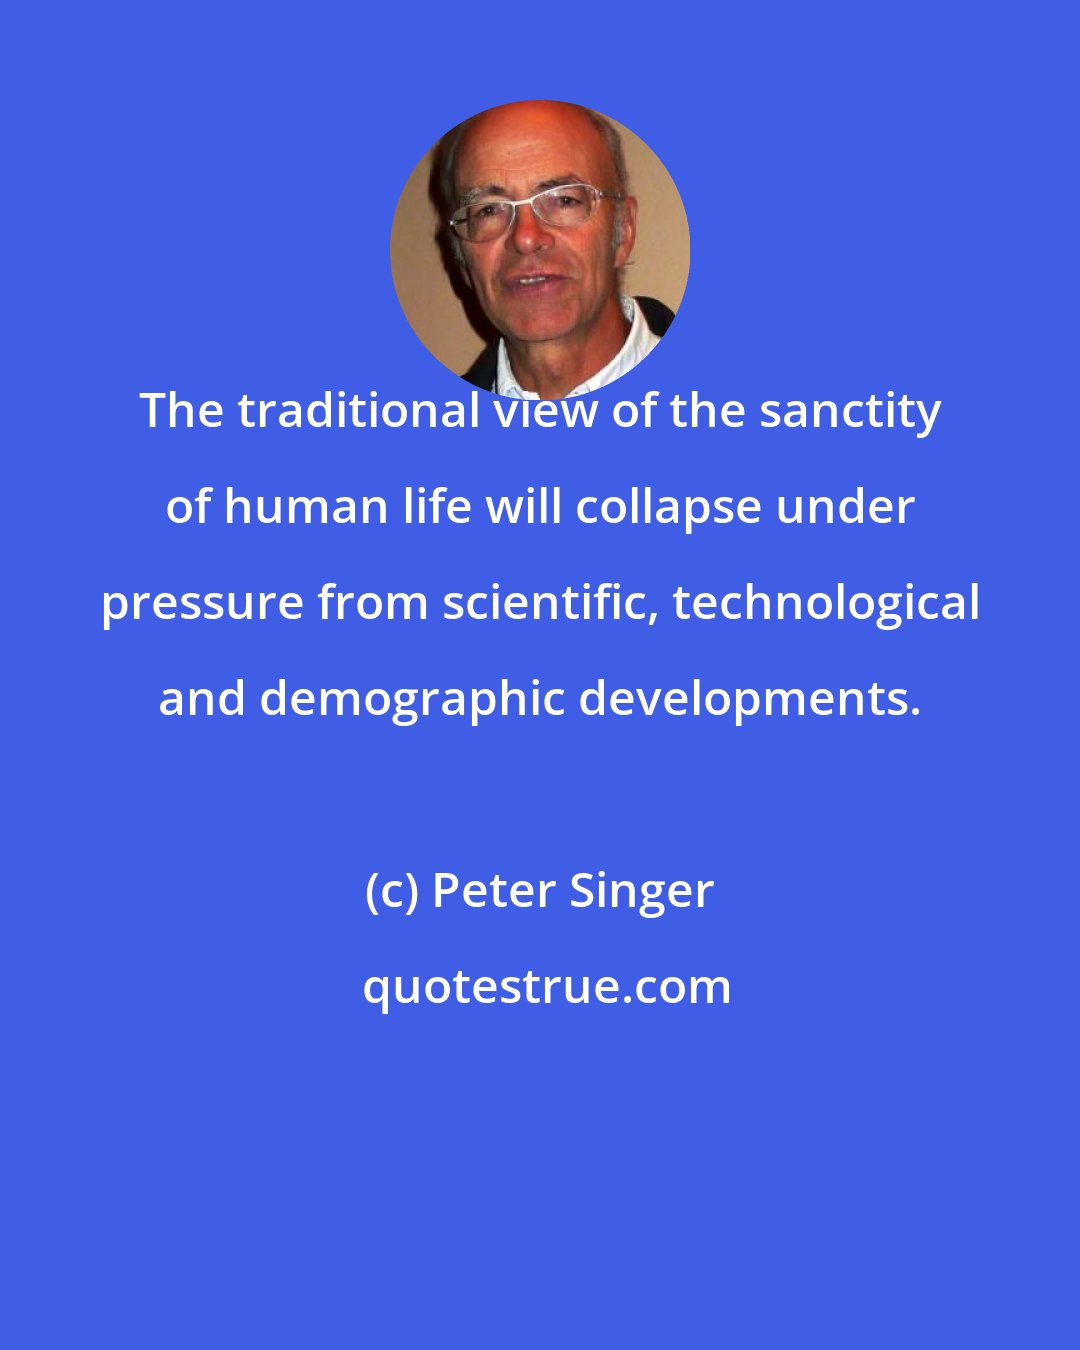 Peter Singer: The traditional view of the sanctity of human life will collapse under pressure from scientific, technological and demographic developments.